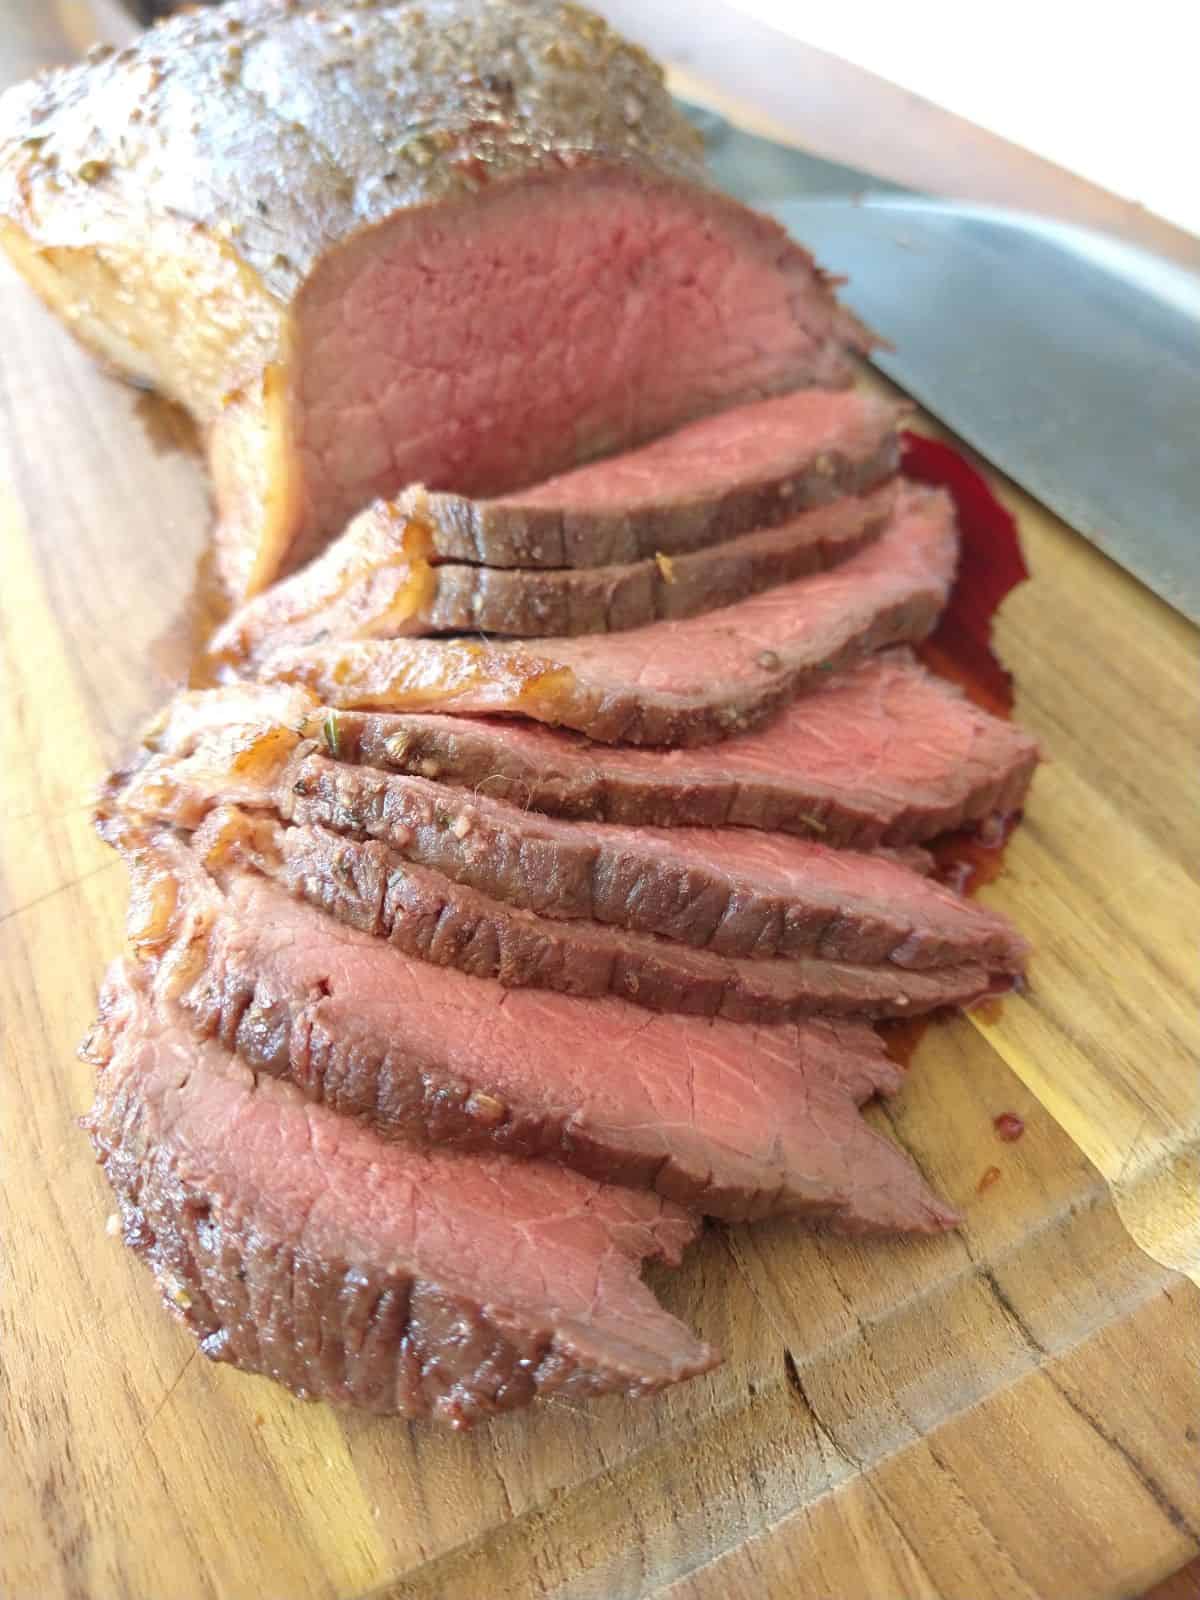 Slices of browed bottom round roast that is pinkish red on the inside are on top of a wood cutting board. A knife is to the right of the roast.